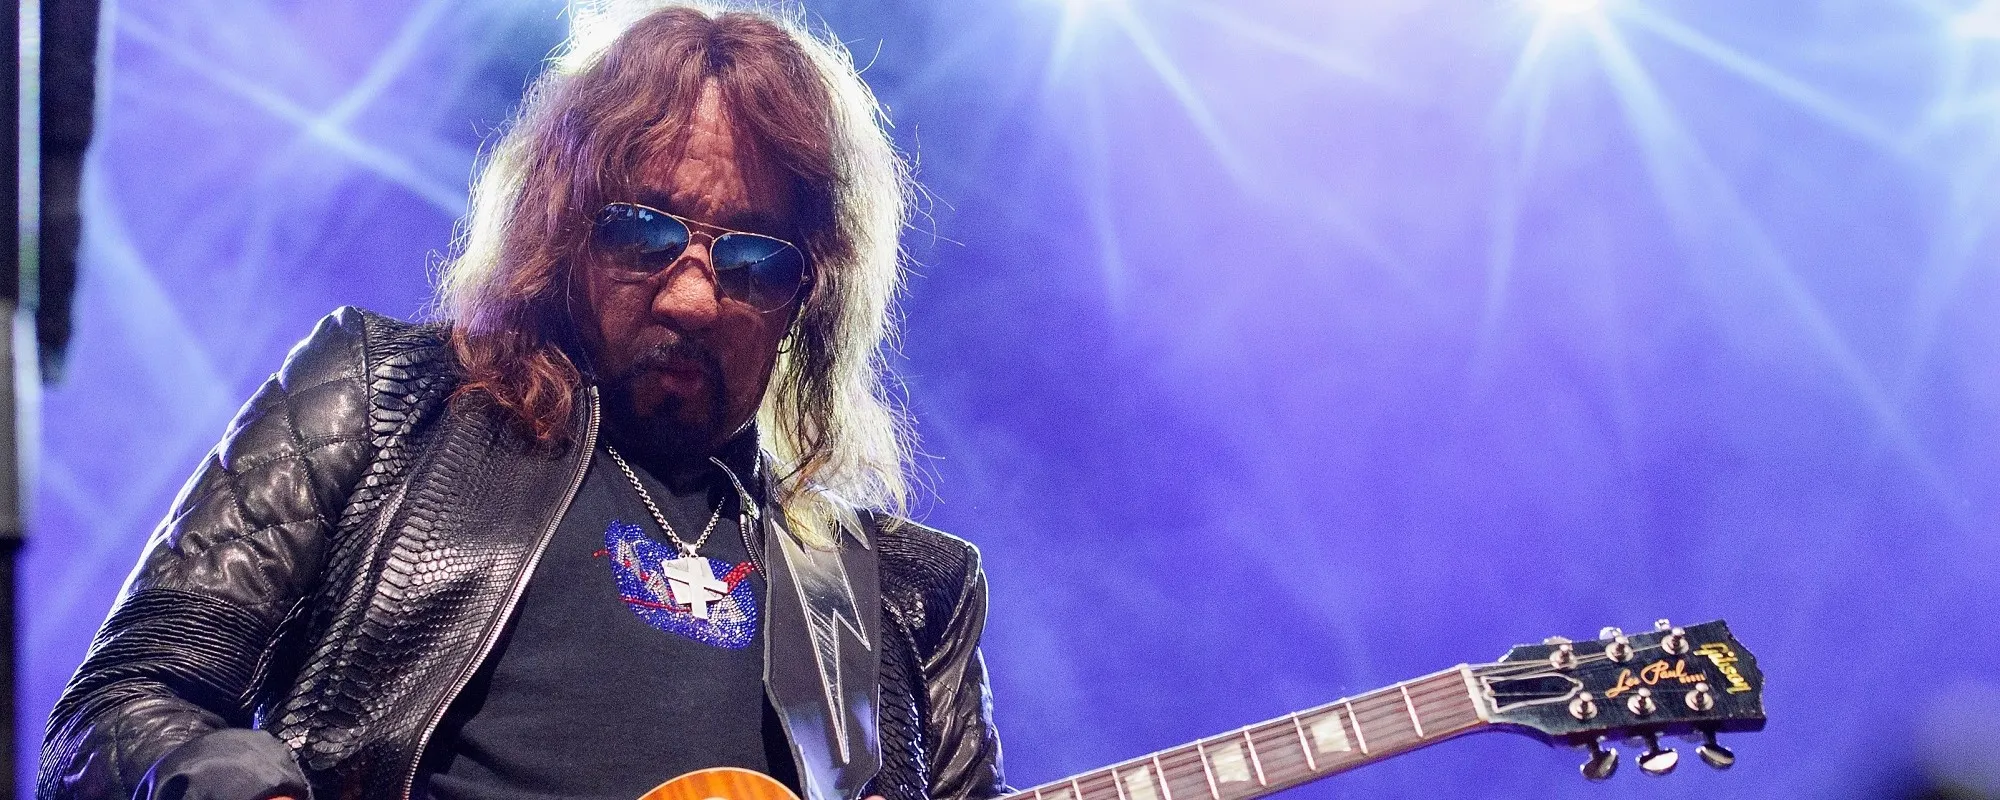 Ace Frehley Continues KISS Feud with Head-Turning Dig at Paul Stanley’s Musical Chops